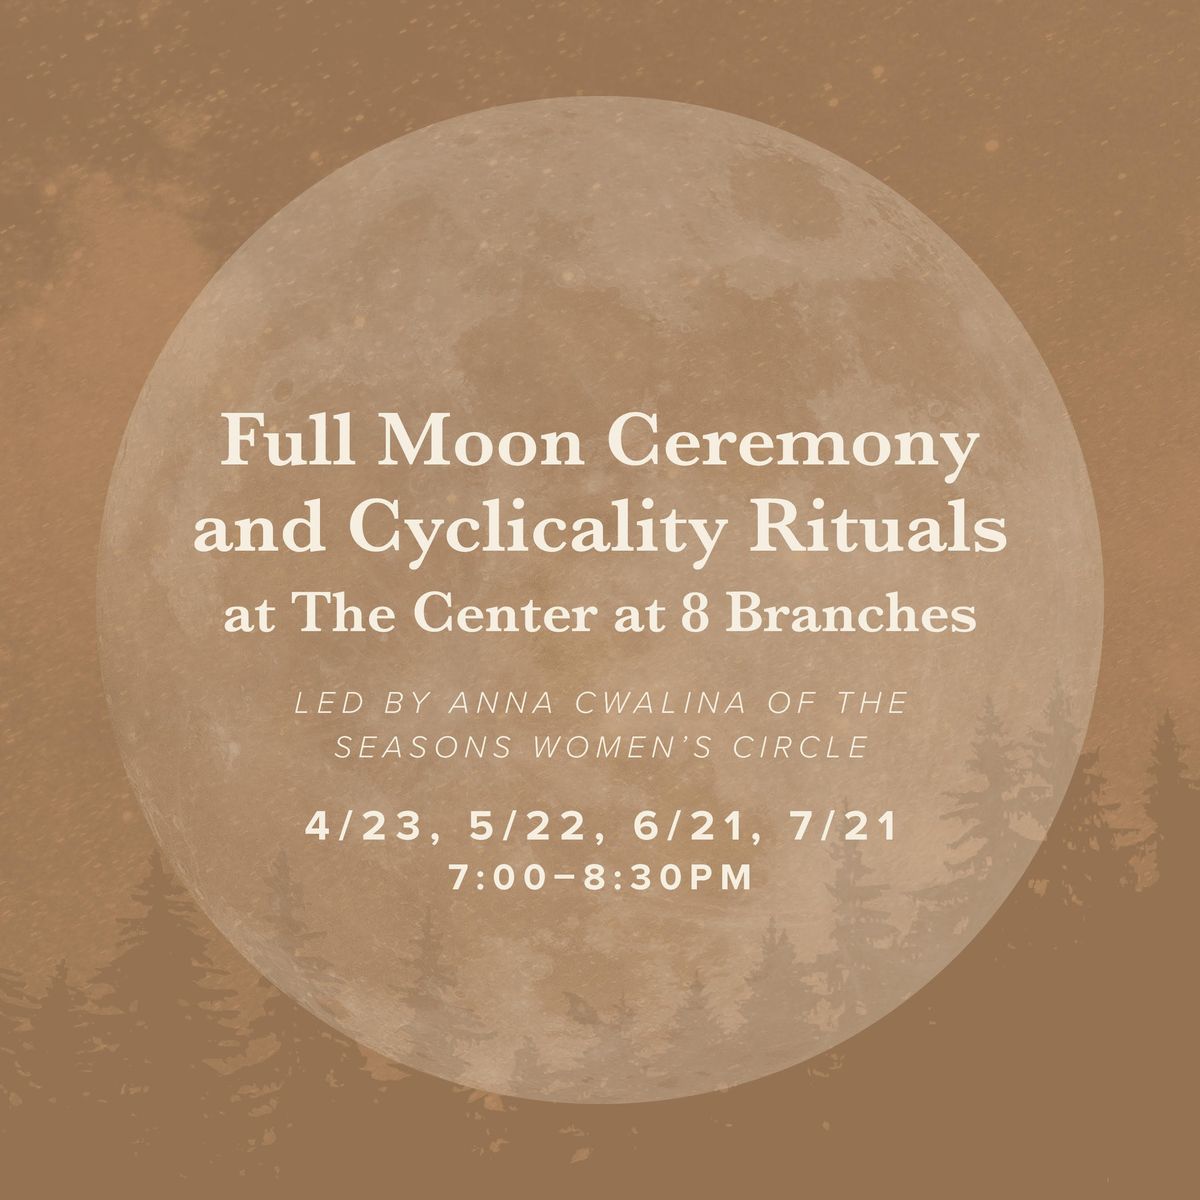 Full Moon Ceremony and Cyclicality Rituals